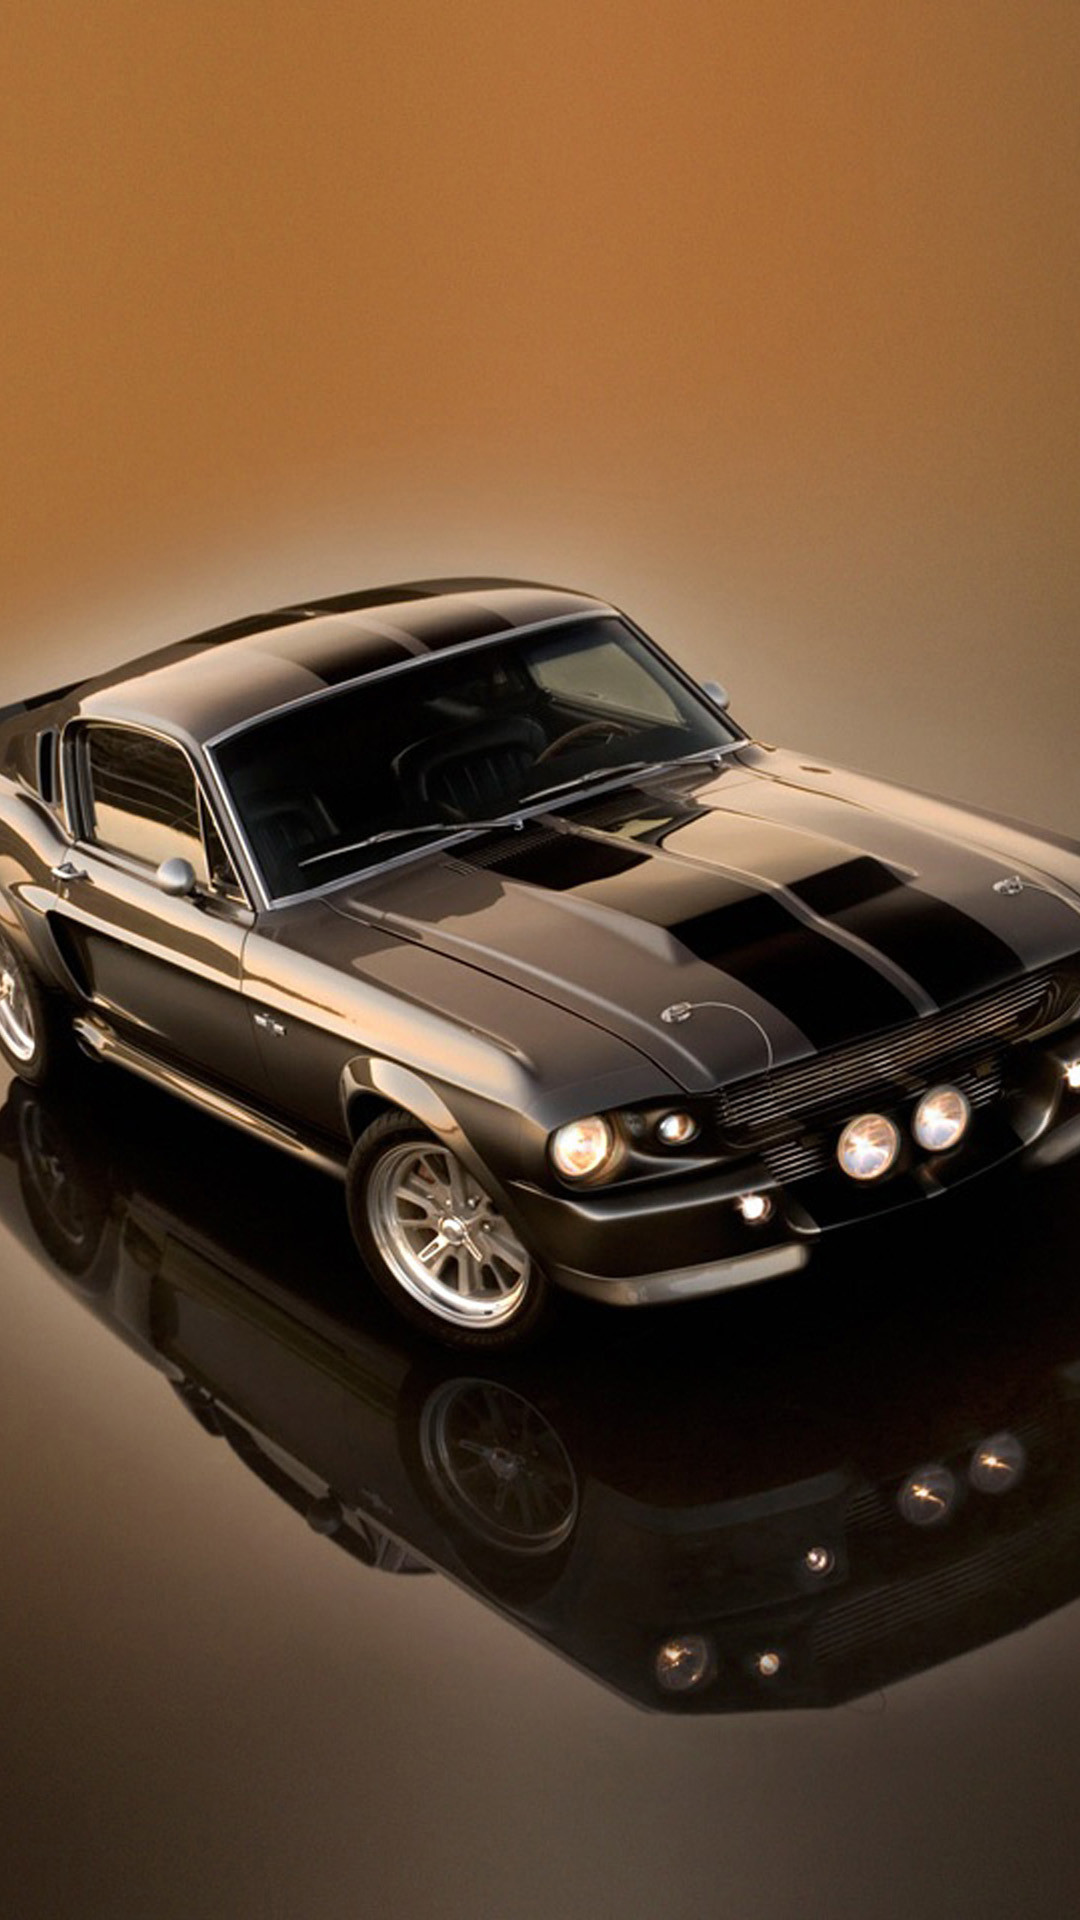 1080x1920 Ford Mustang Shelby Iphone Wallpaper : Ford mustang shelby gt eleanor  wallpapers for galaxy s